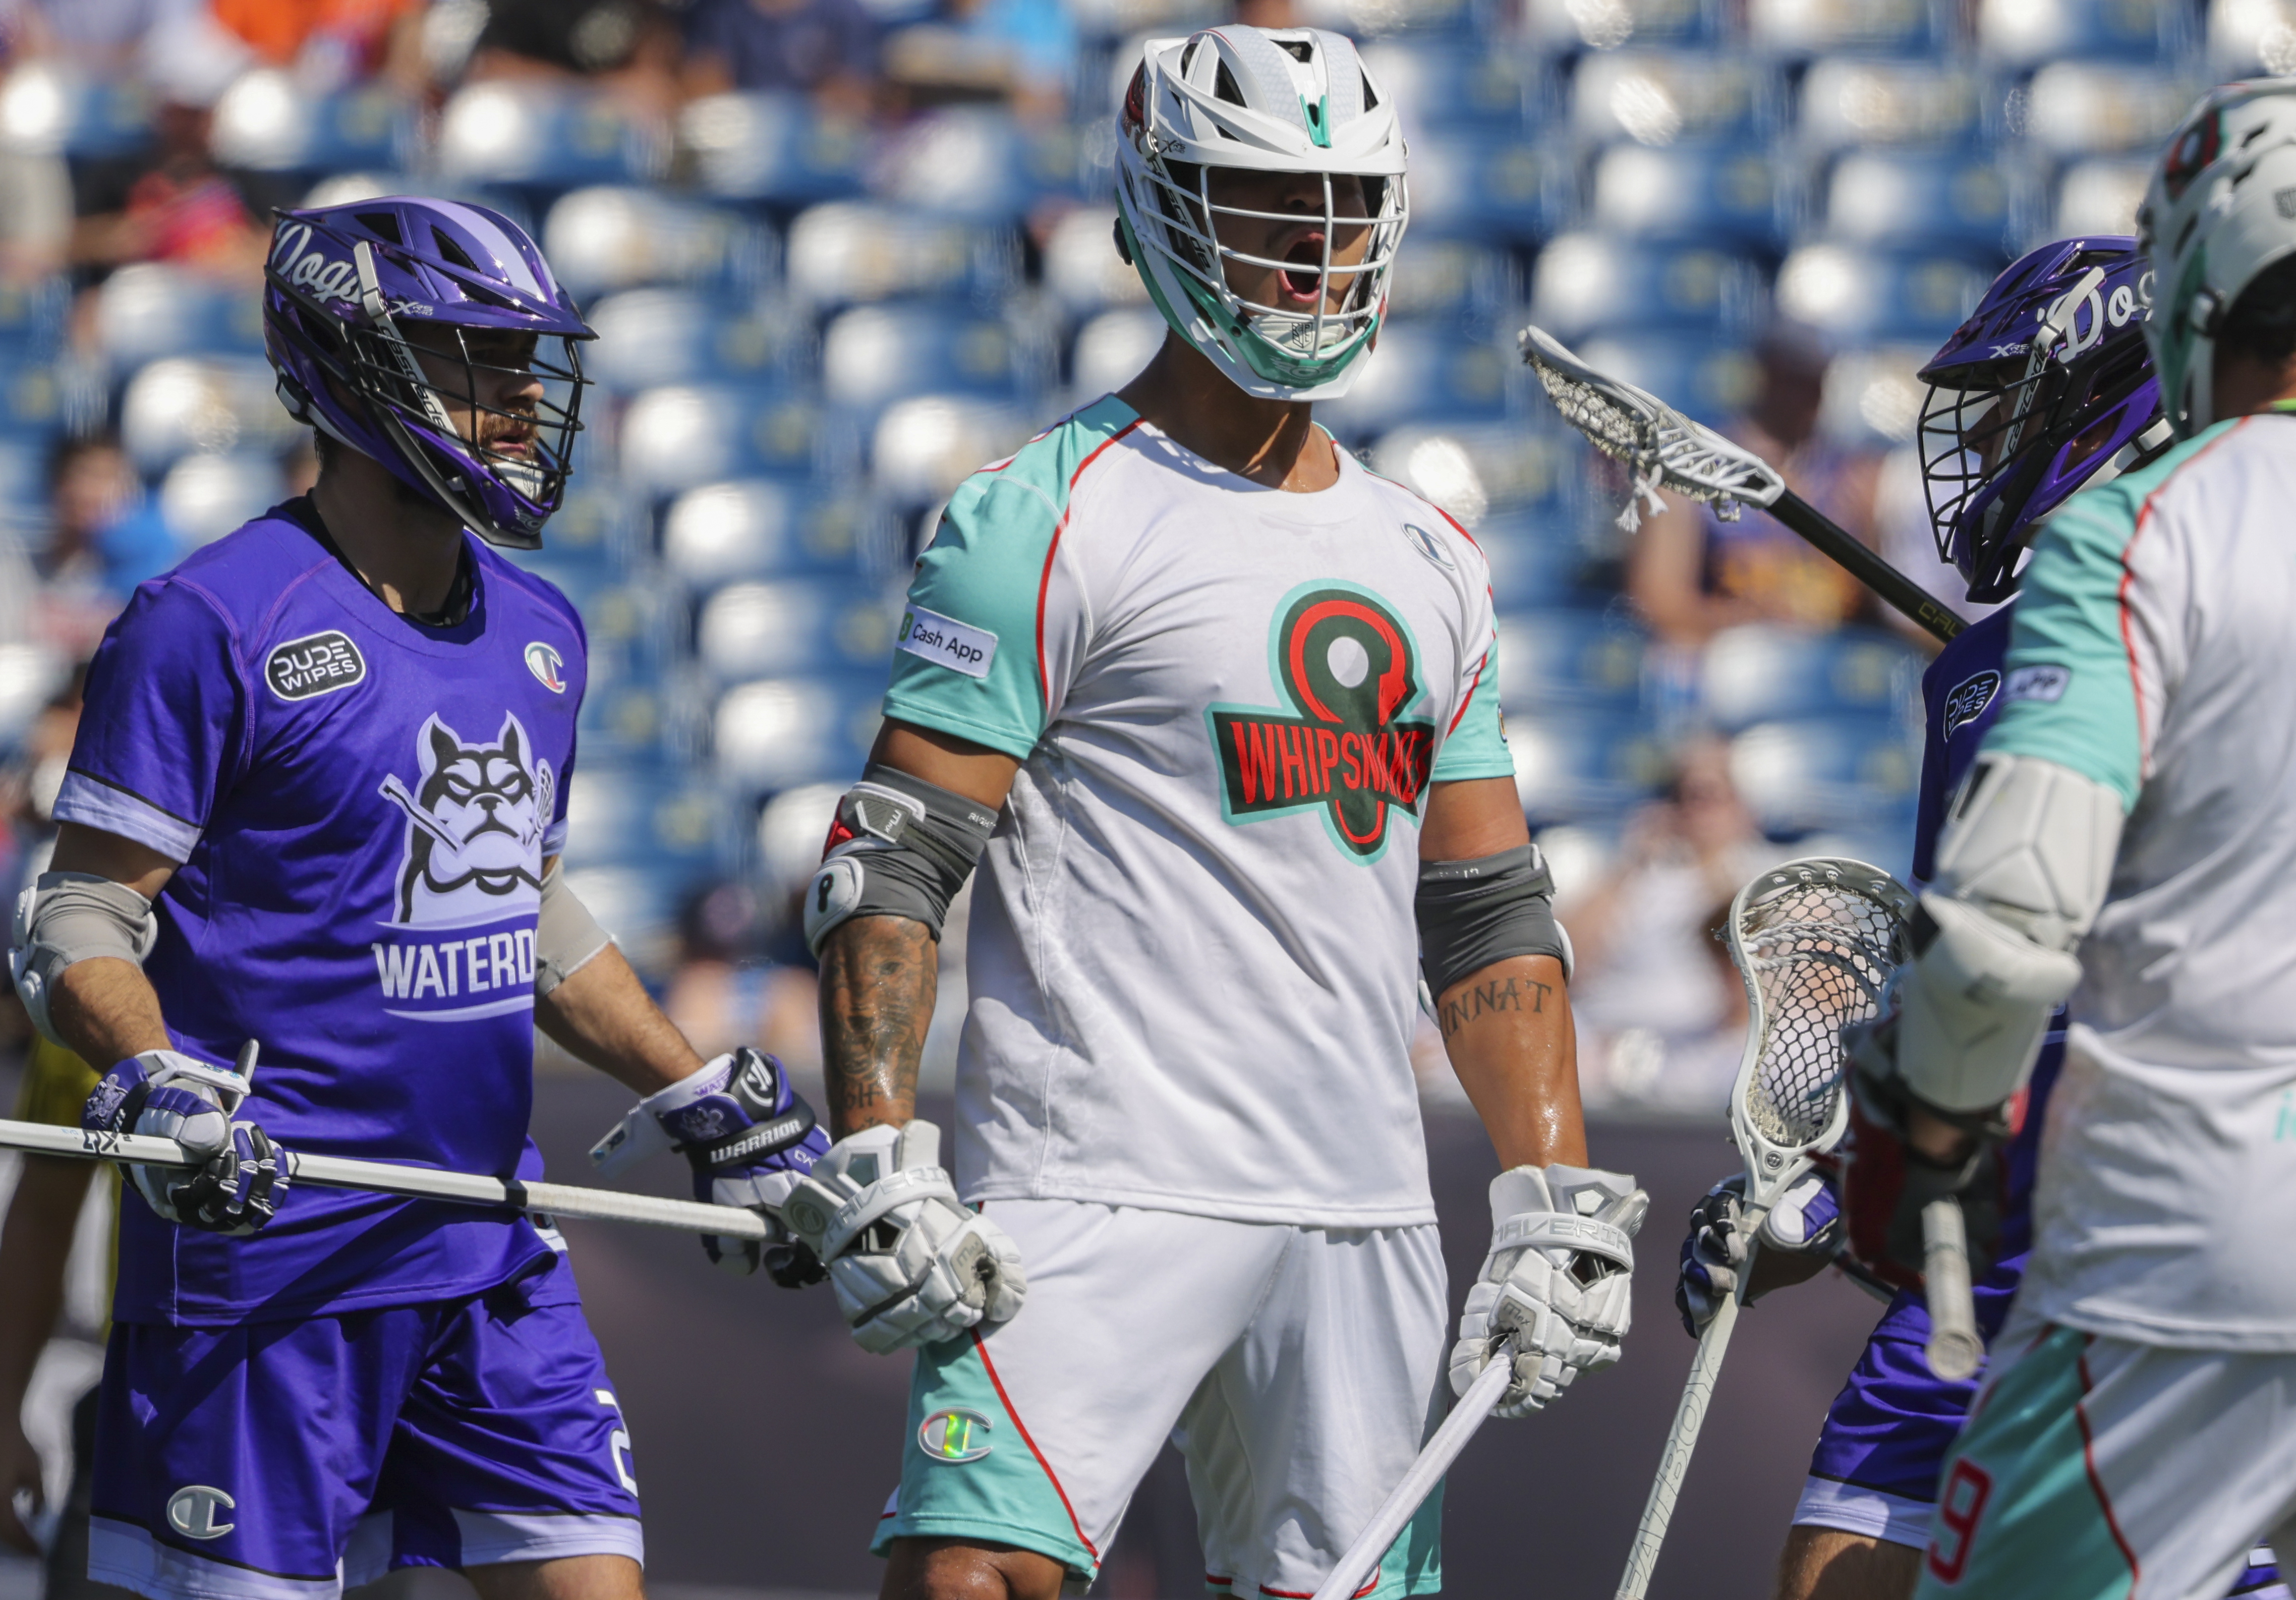 Premier Lacrosse League comes to Philly, co-founder Paul Rabil on  semifinals & lacrosse growth